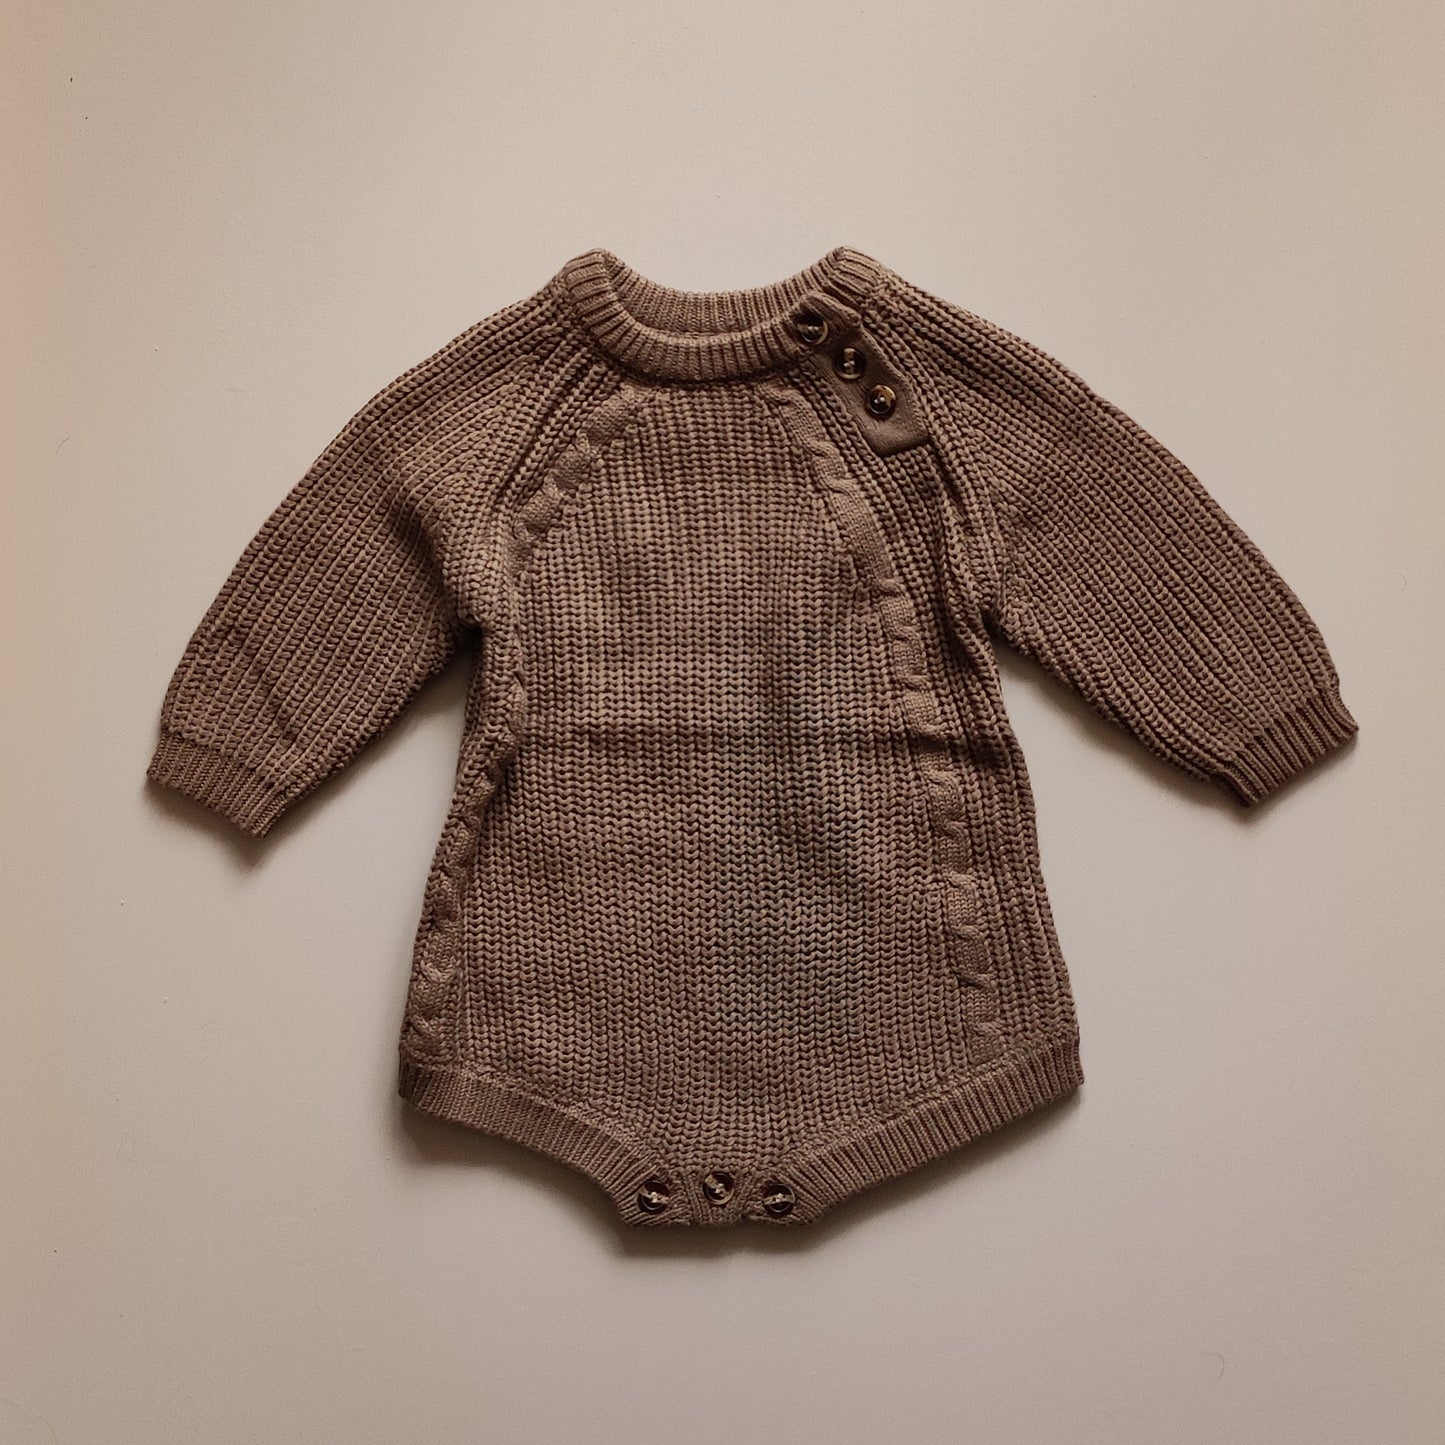 Knitted baby romper